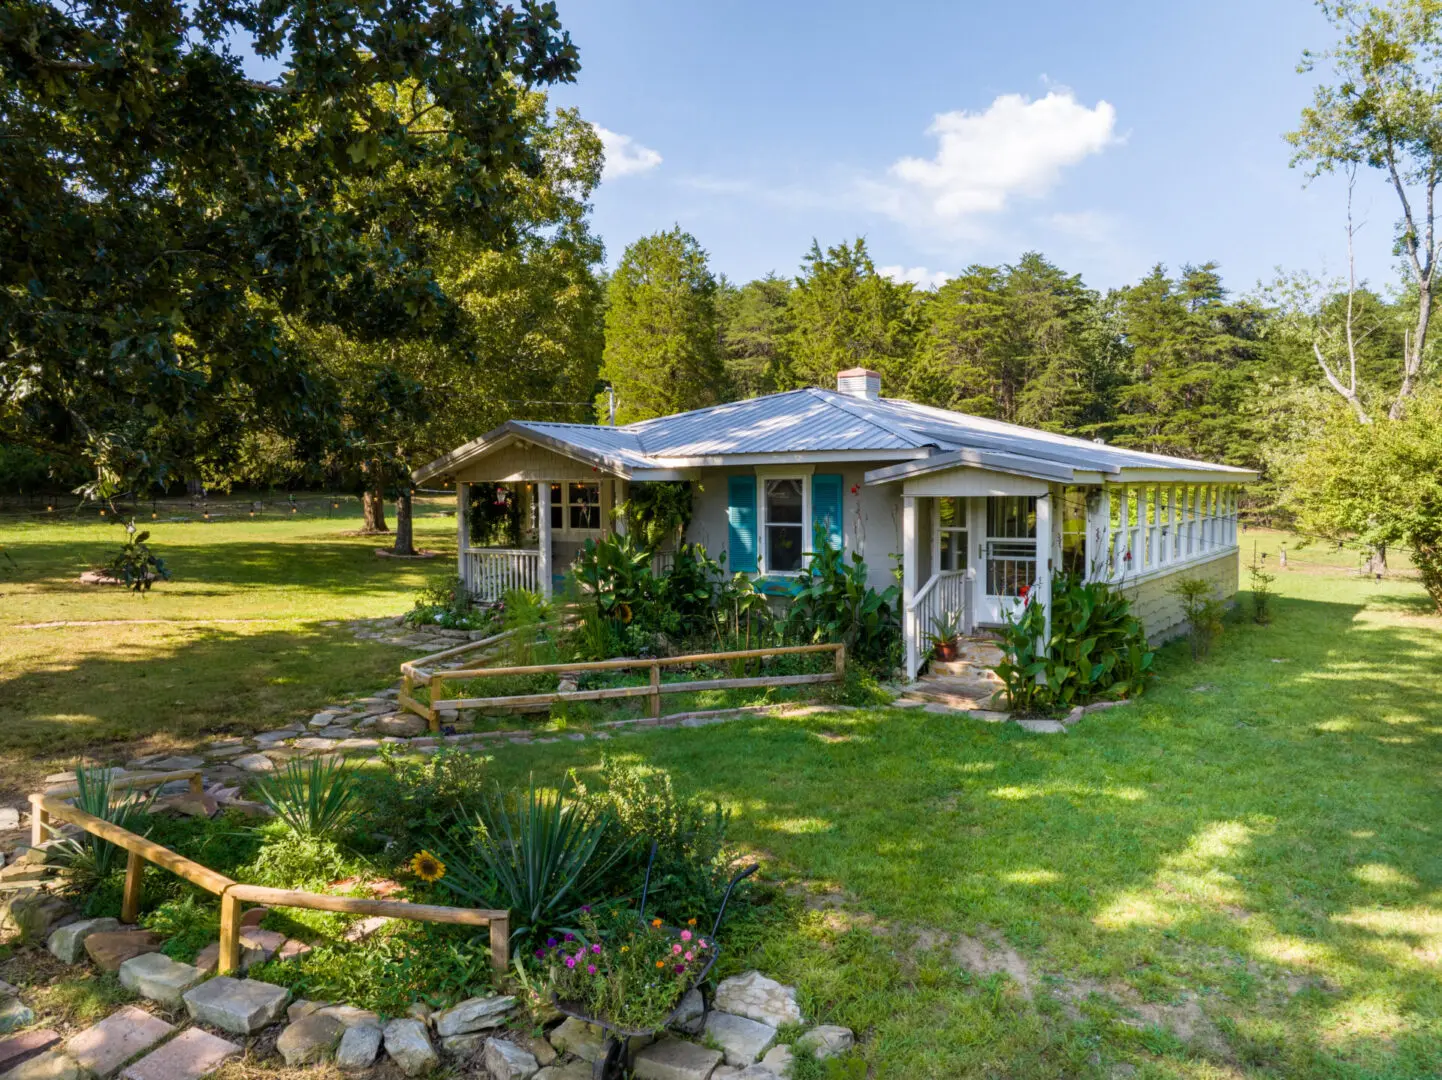 A cozy cabin nestled in the middle of a lush green field, perfect for Mentone cabin rentals.